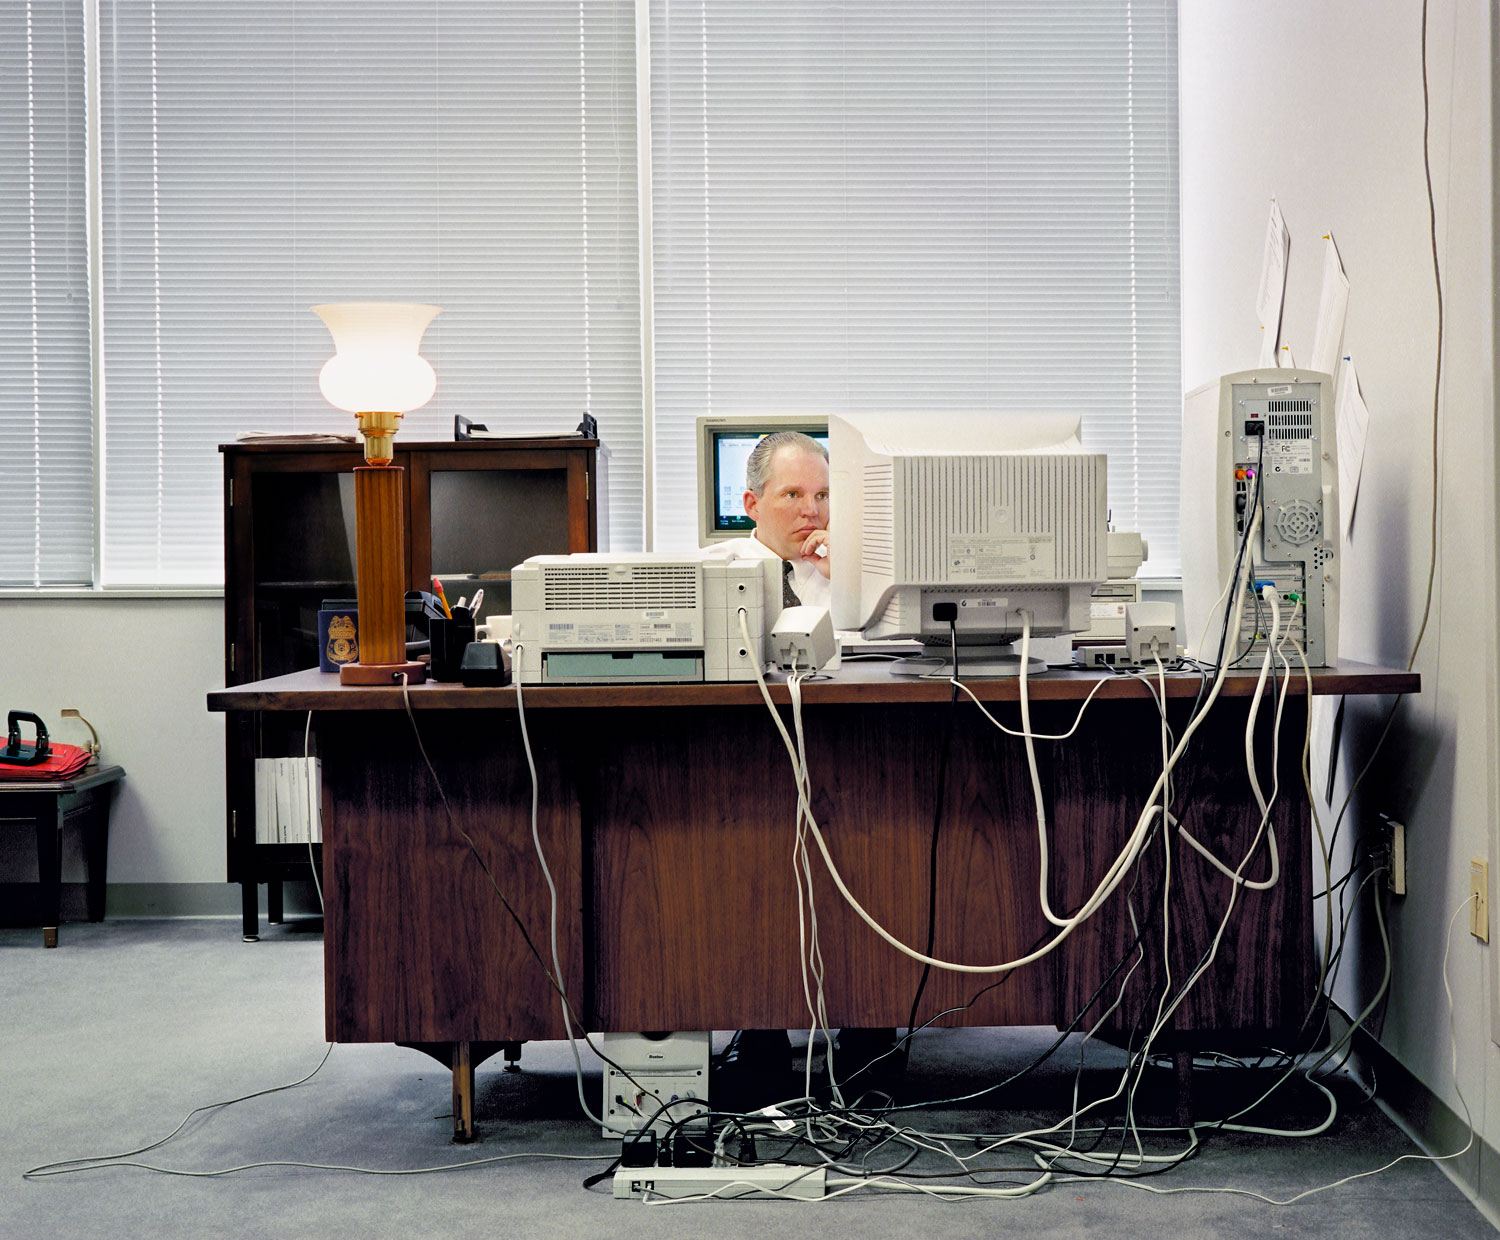 Photos of 90s offices show how much, and how little, has changed